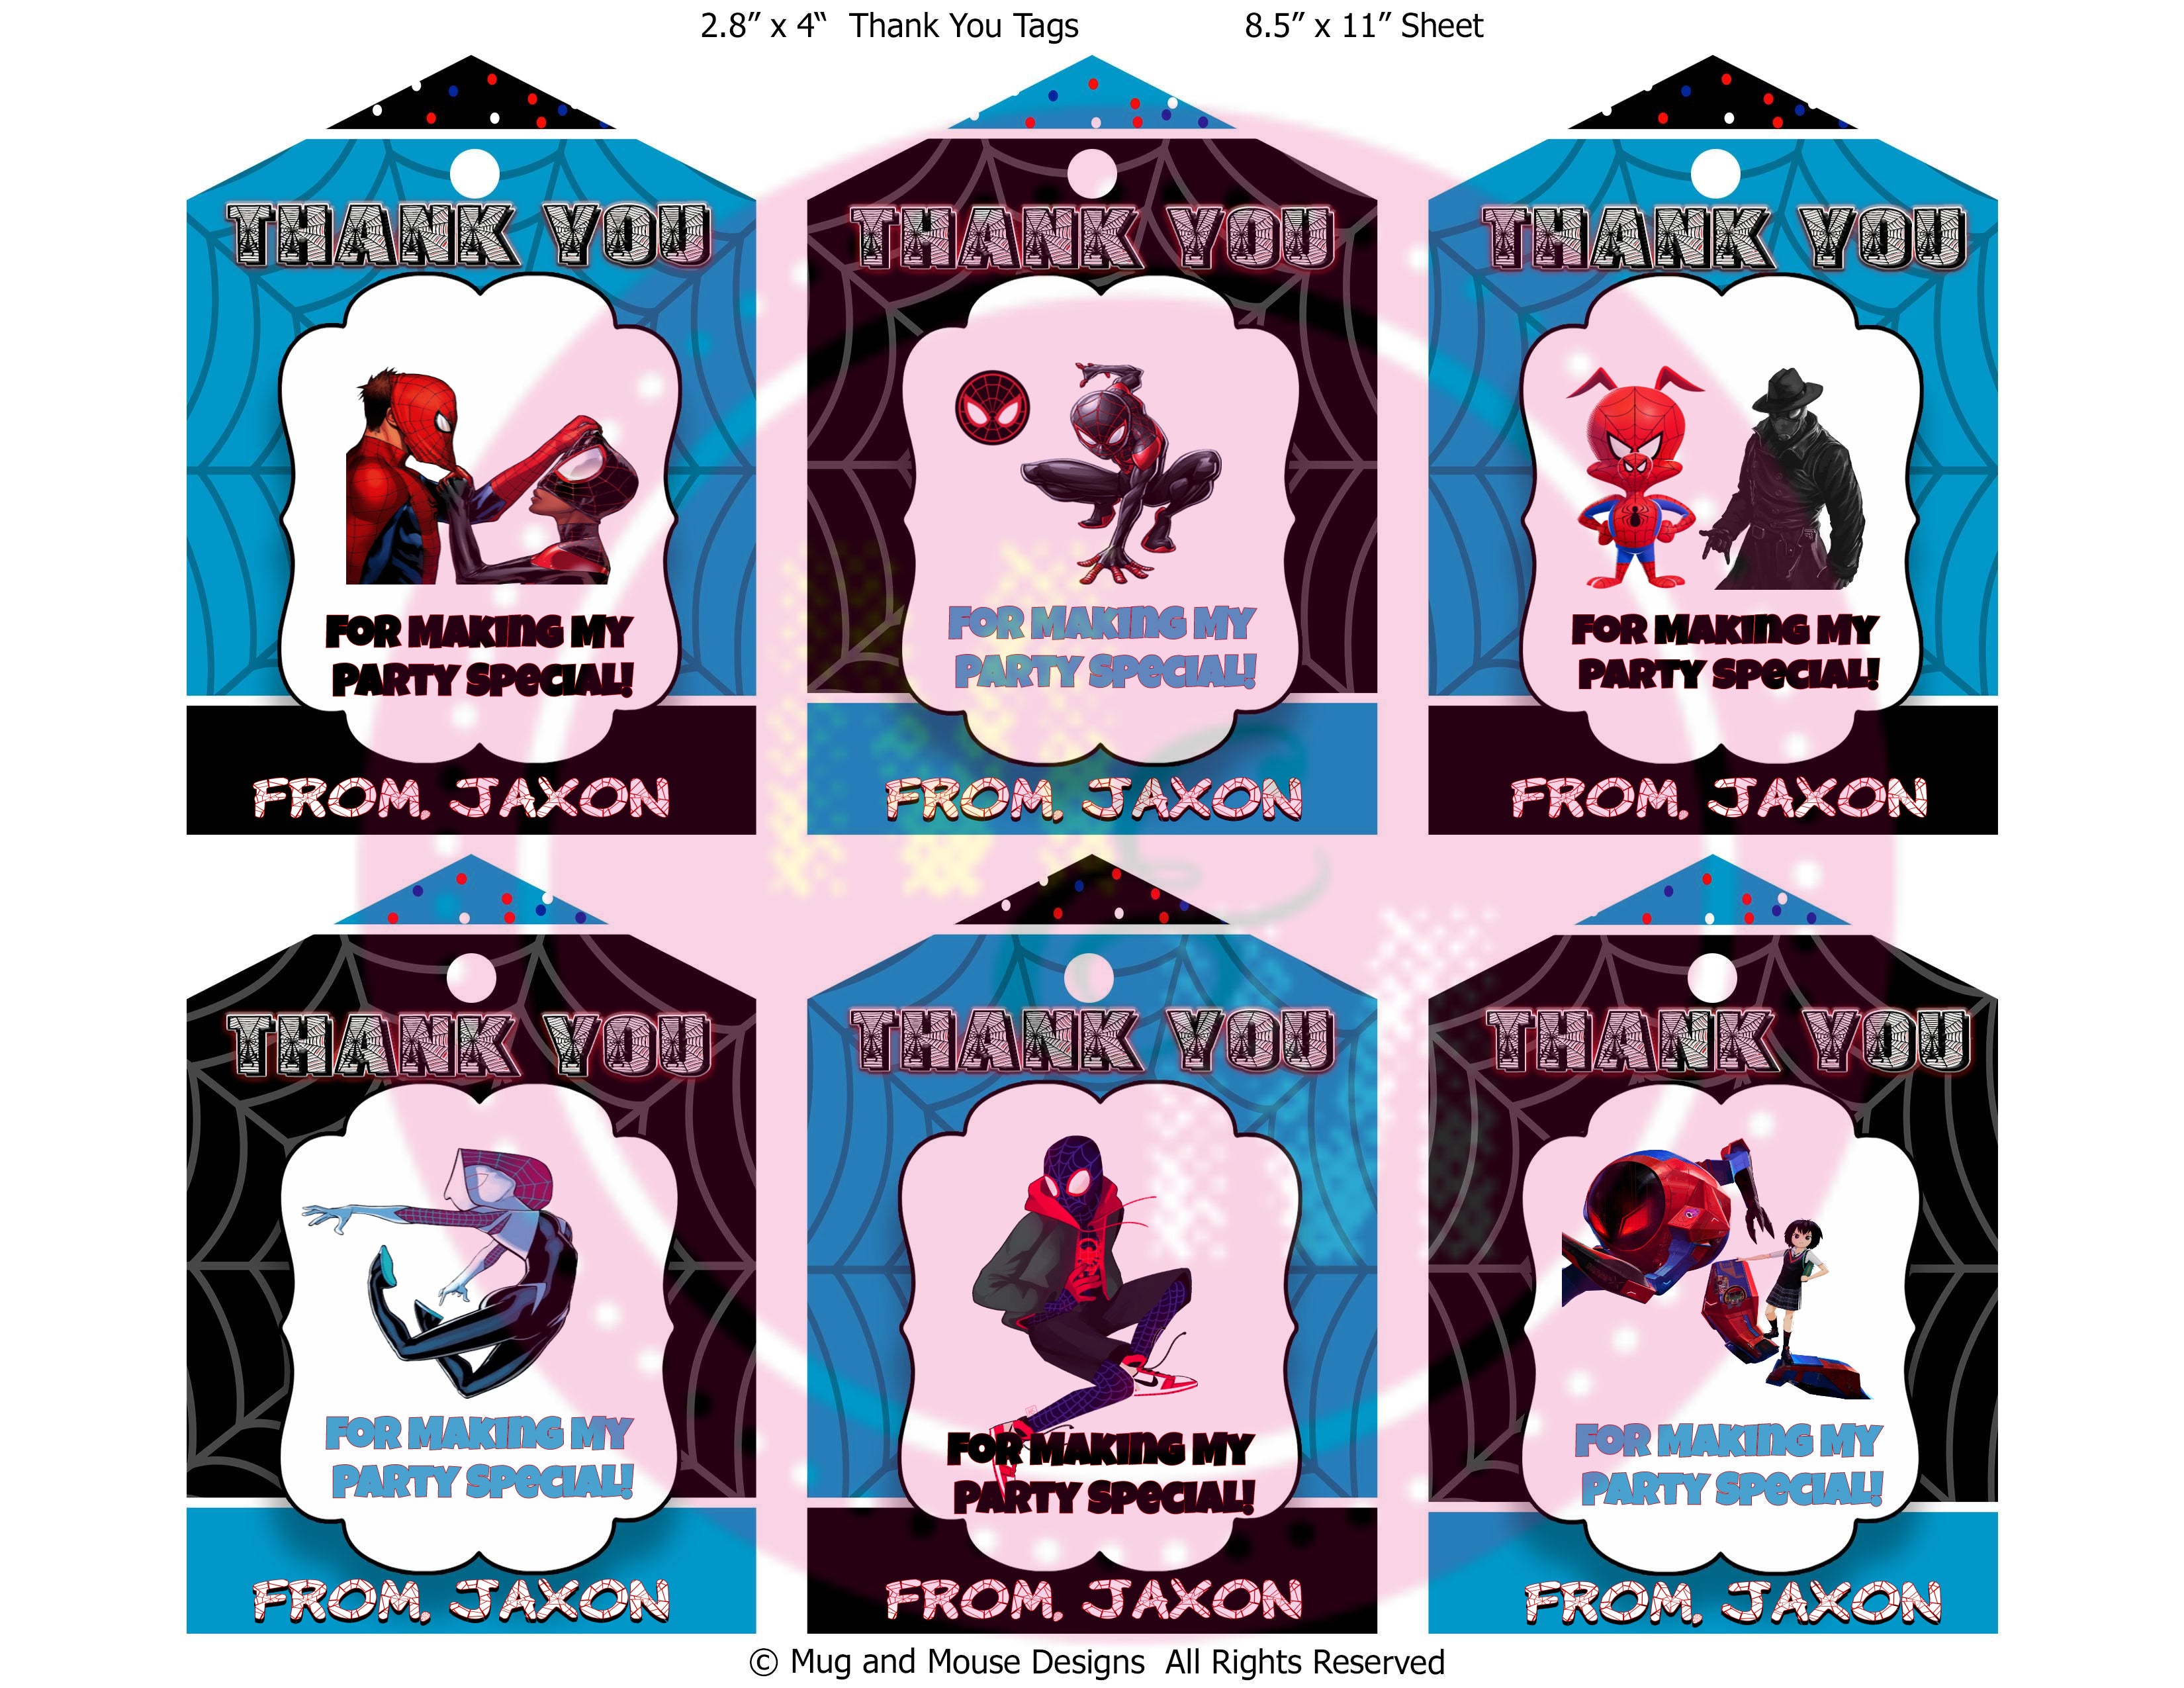 Editable Spider Hero Thank You Favor Tags Printable, Spider Hero Gift Bag Tags Spider-man Thank You Tags, Miles Morales 2018